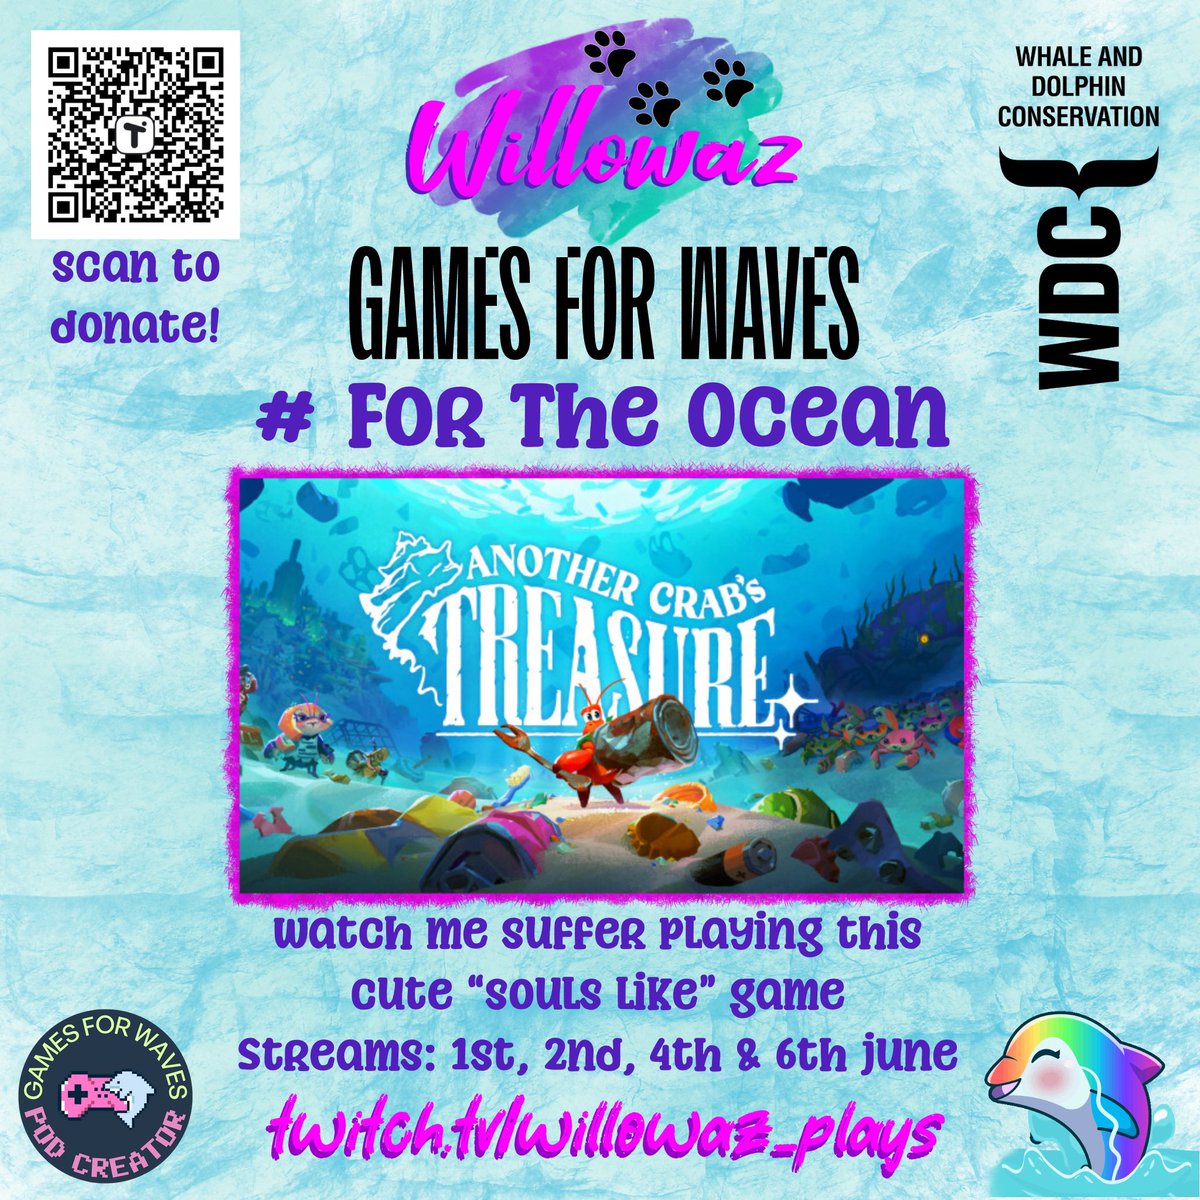 ITS FUNDRAISING TIME! #ForTheOcean 🩵🌊🪼🐠🐬🐳🐋🐳🐬🐠🪼🌊🩵 From Saturday 1st June I will be fundraising for the amazing @GamesForWaves in aid of @whalesorg I will be playing #AnotherCrabsTreasure for all the chaos! (More details below 👇)